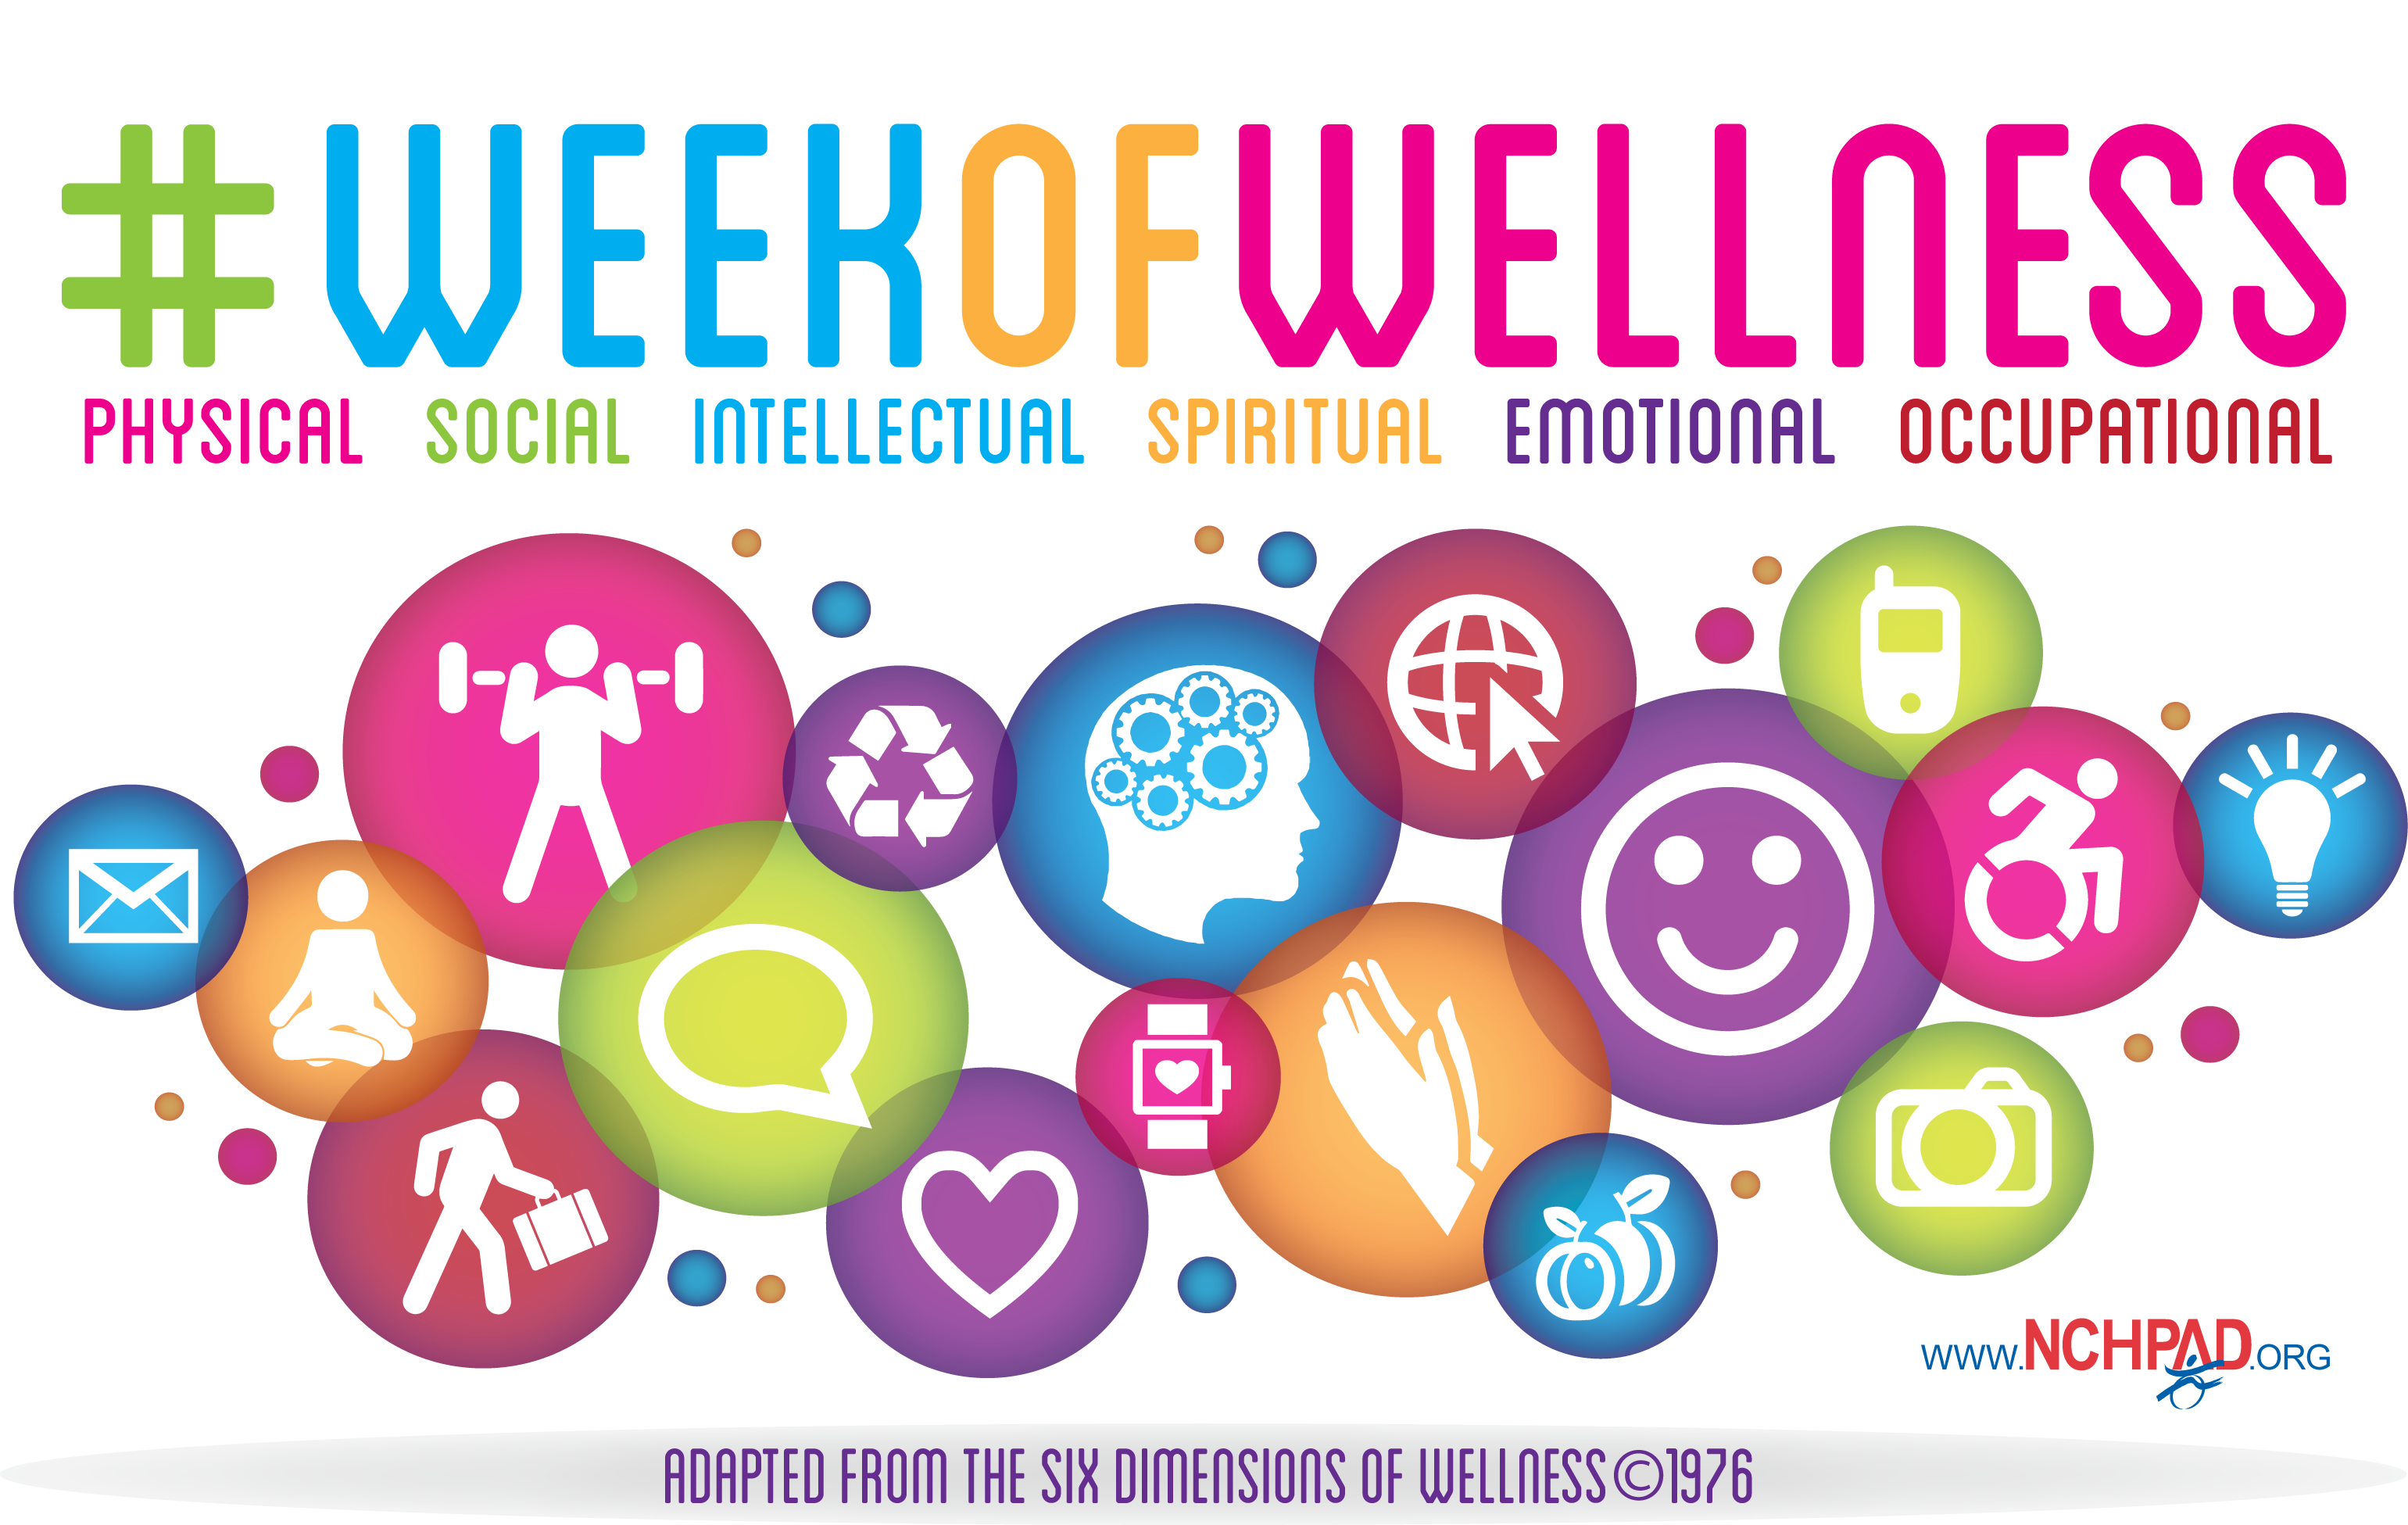 A Week's Worth of Wellness NCHPAD Building Healthy Inclusive